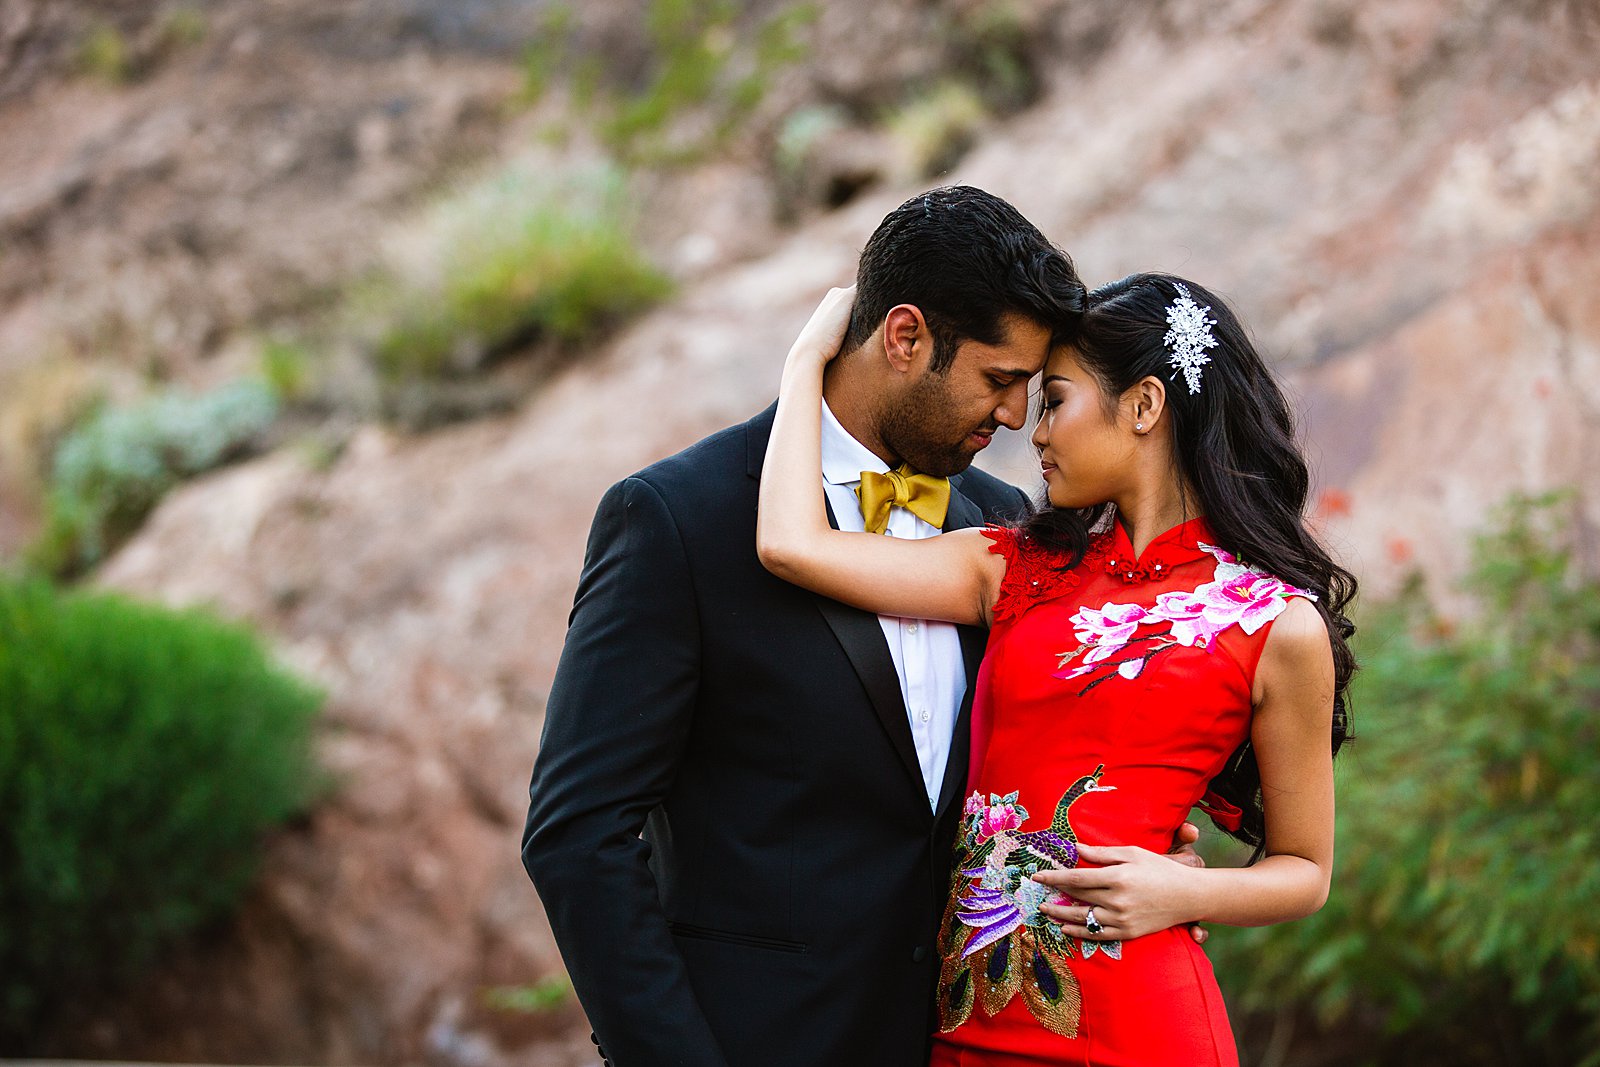 Bride and Groom share an intimate moment during their multicultural wedding by Phoenix wedding photographer PMA Photography.